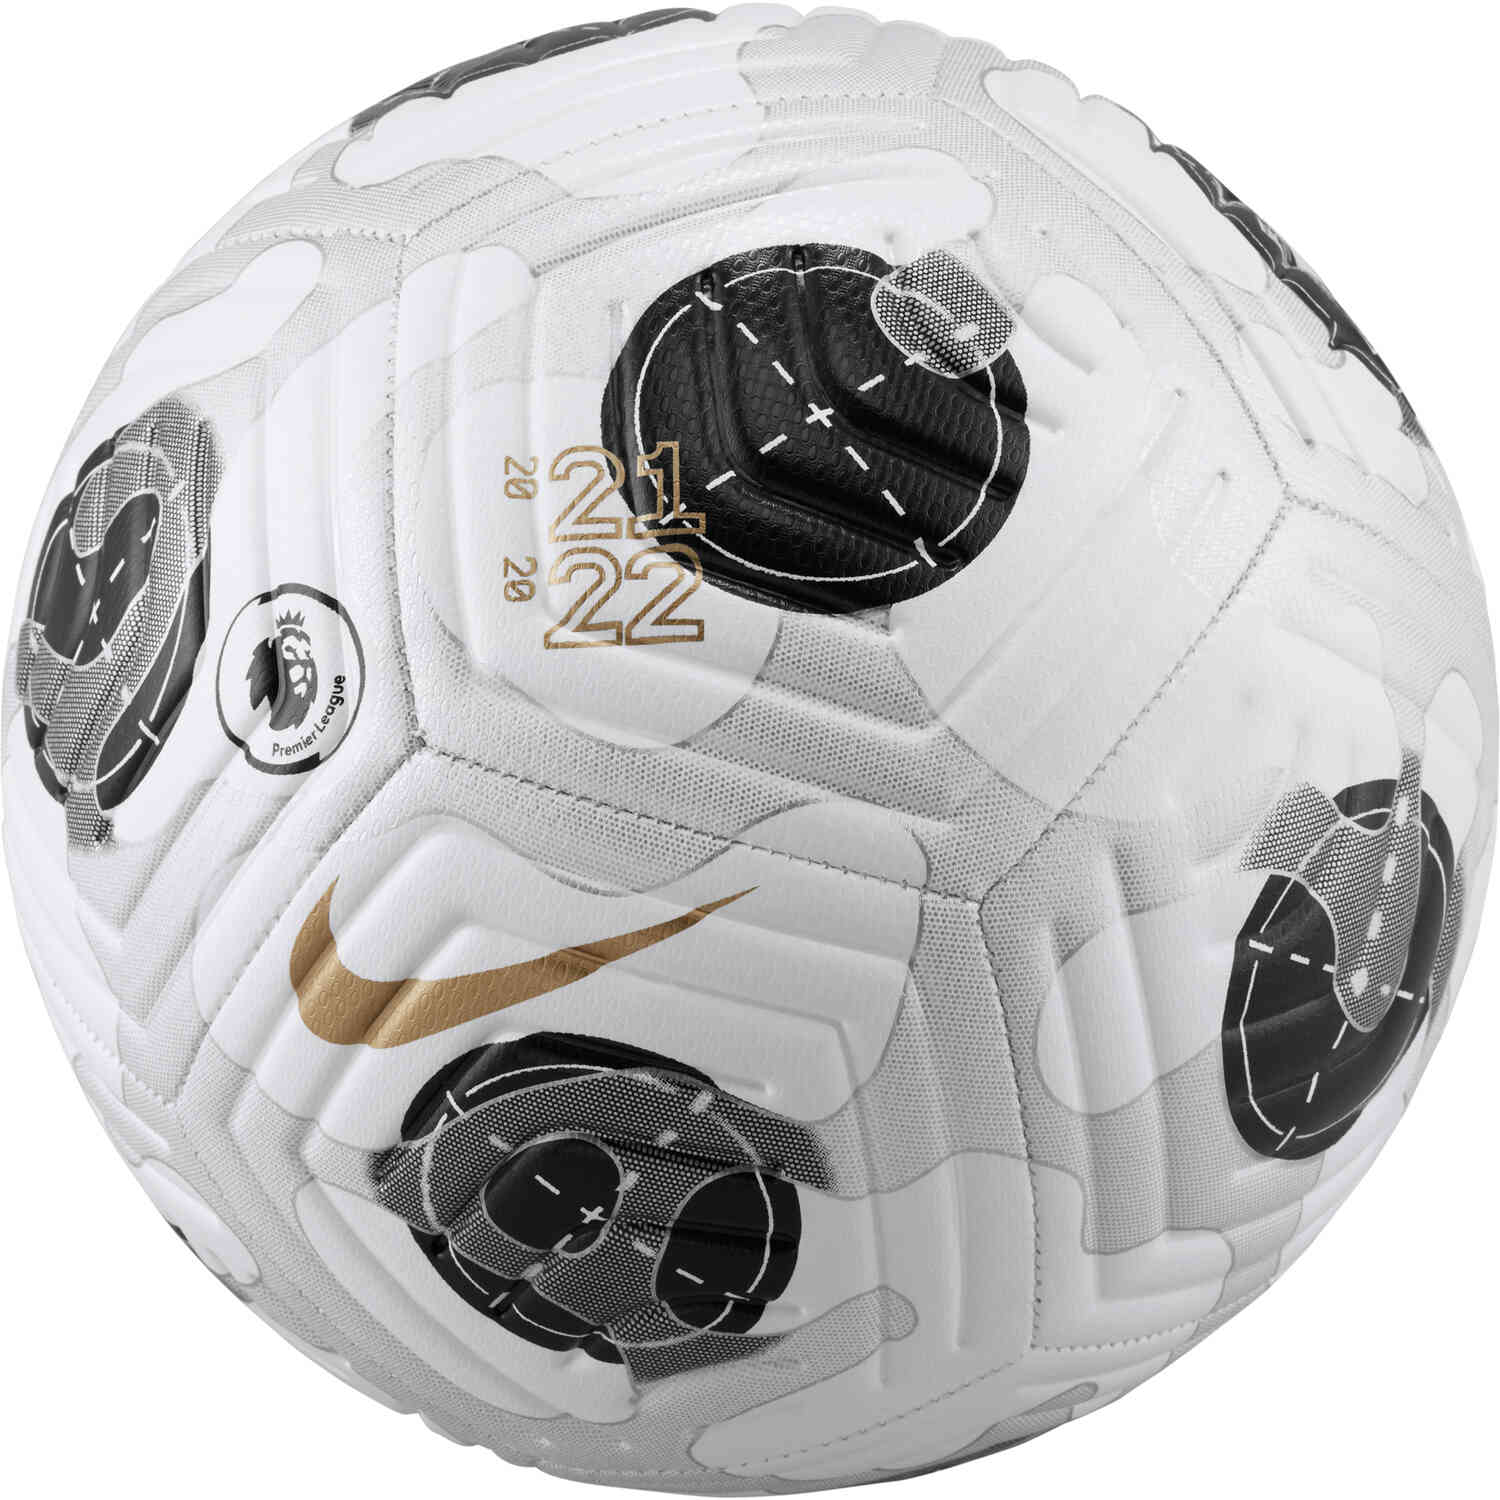 Nike Premier League Strike Soccer Ball White And Silver With Black With Gold Soccerpro